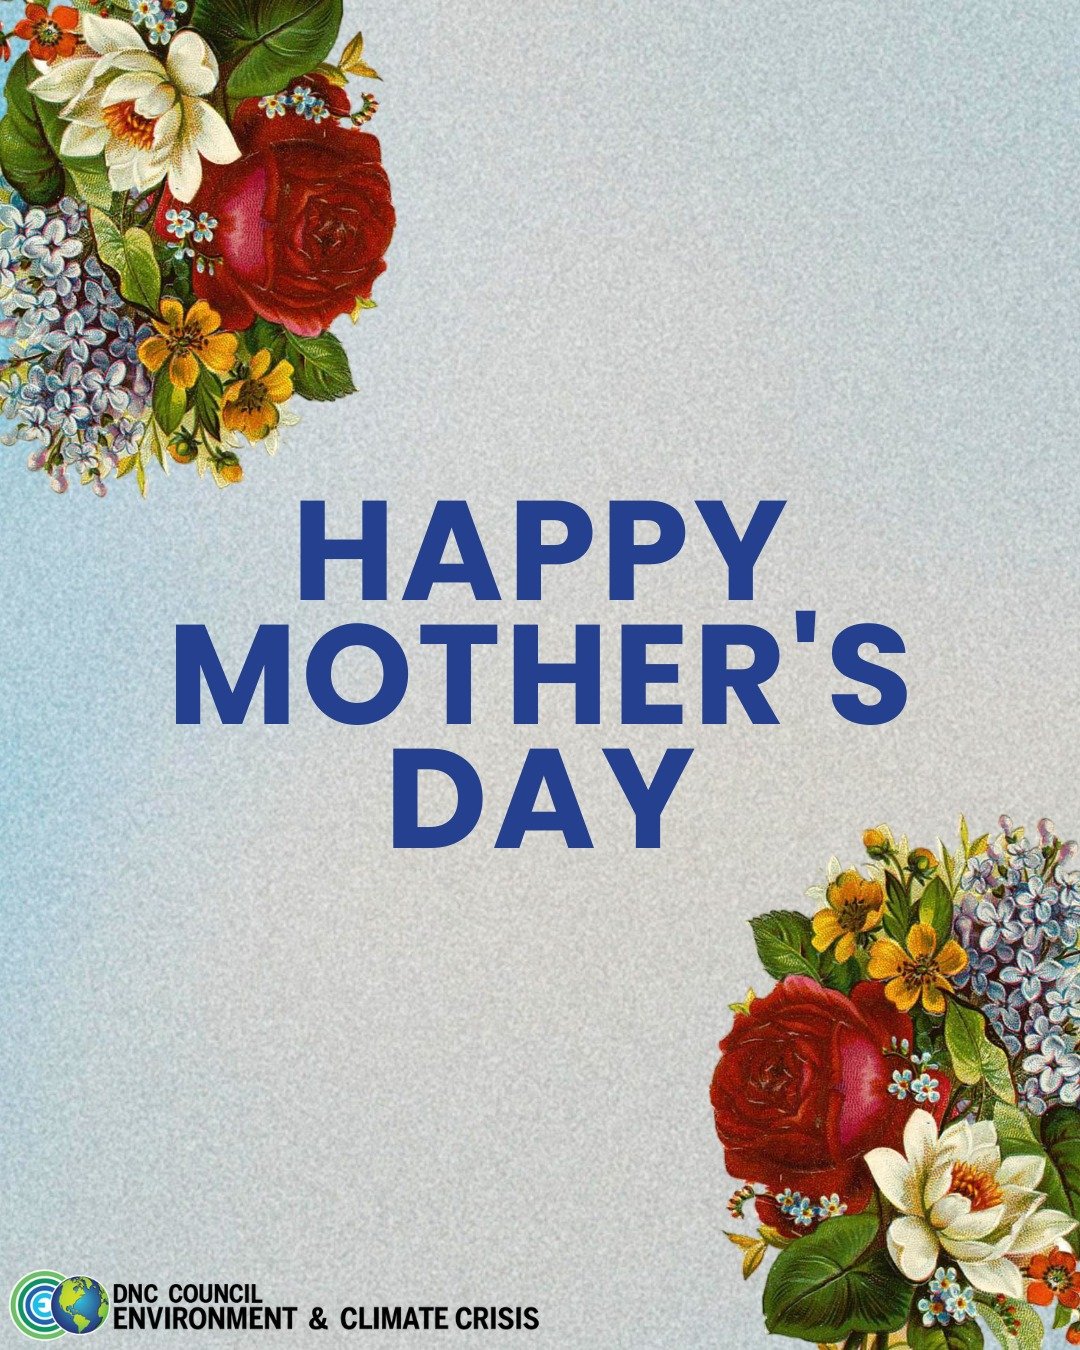 💚 This Mother's Day, we're celebrating the incredible strength, resilience, and love of mothers everywhere. 

🌍 Let's honor this special day by continuing to advocate for our environment so that future generations can thrive!
.
.
.
#MothersDay #Env